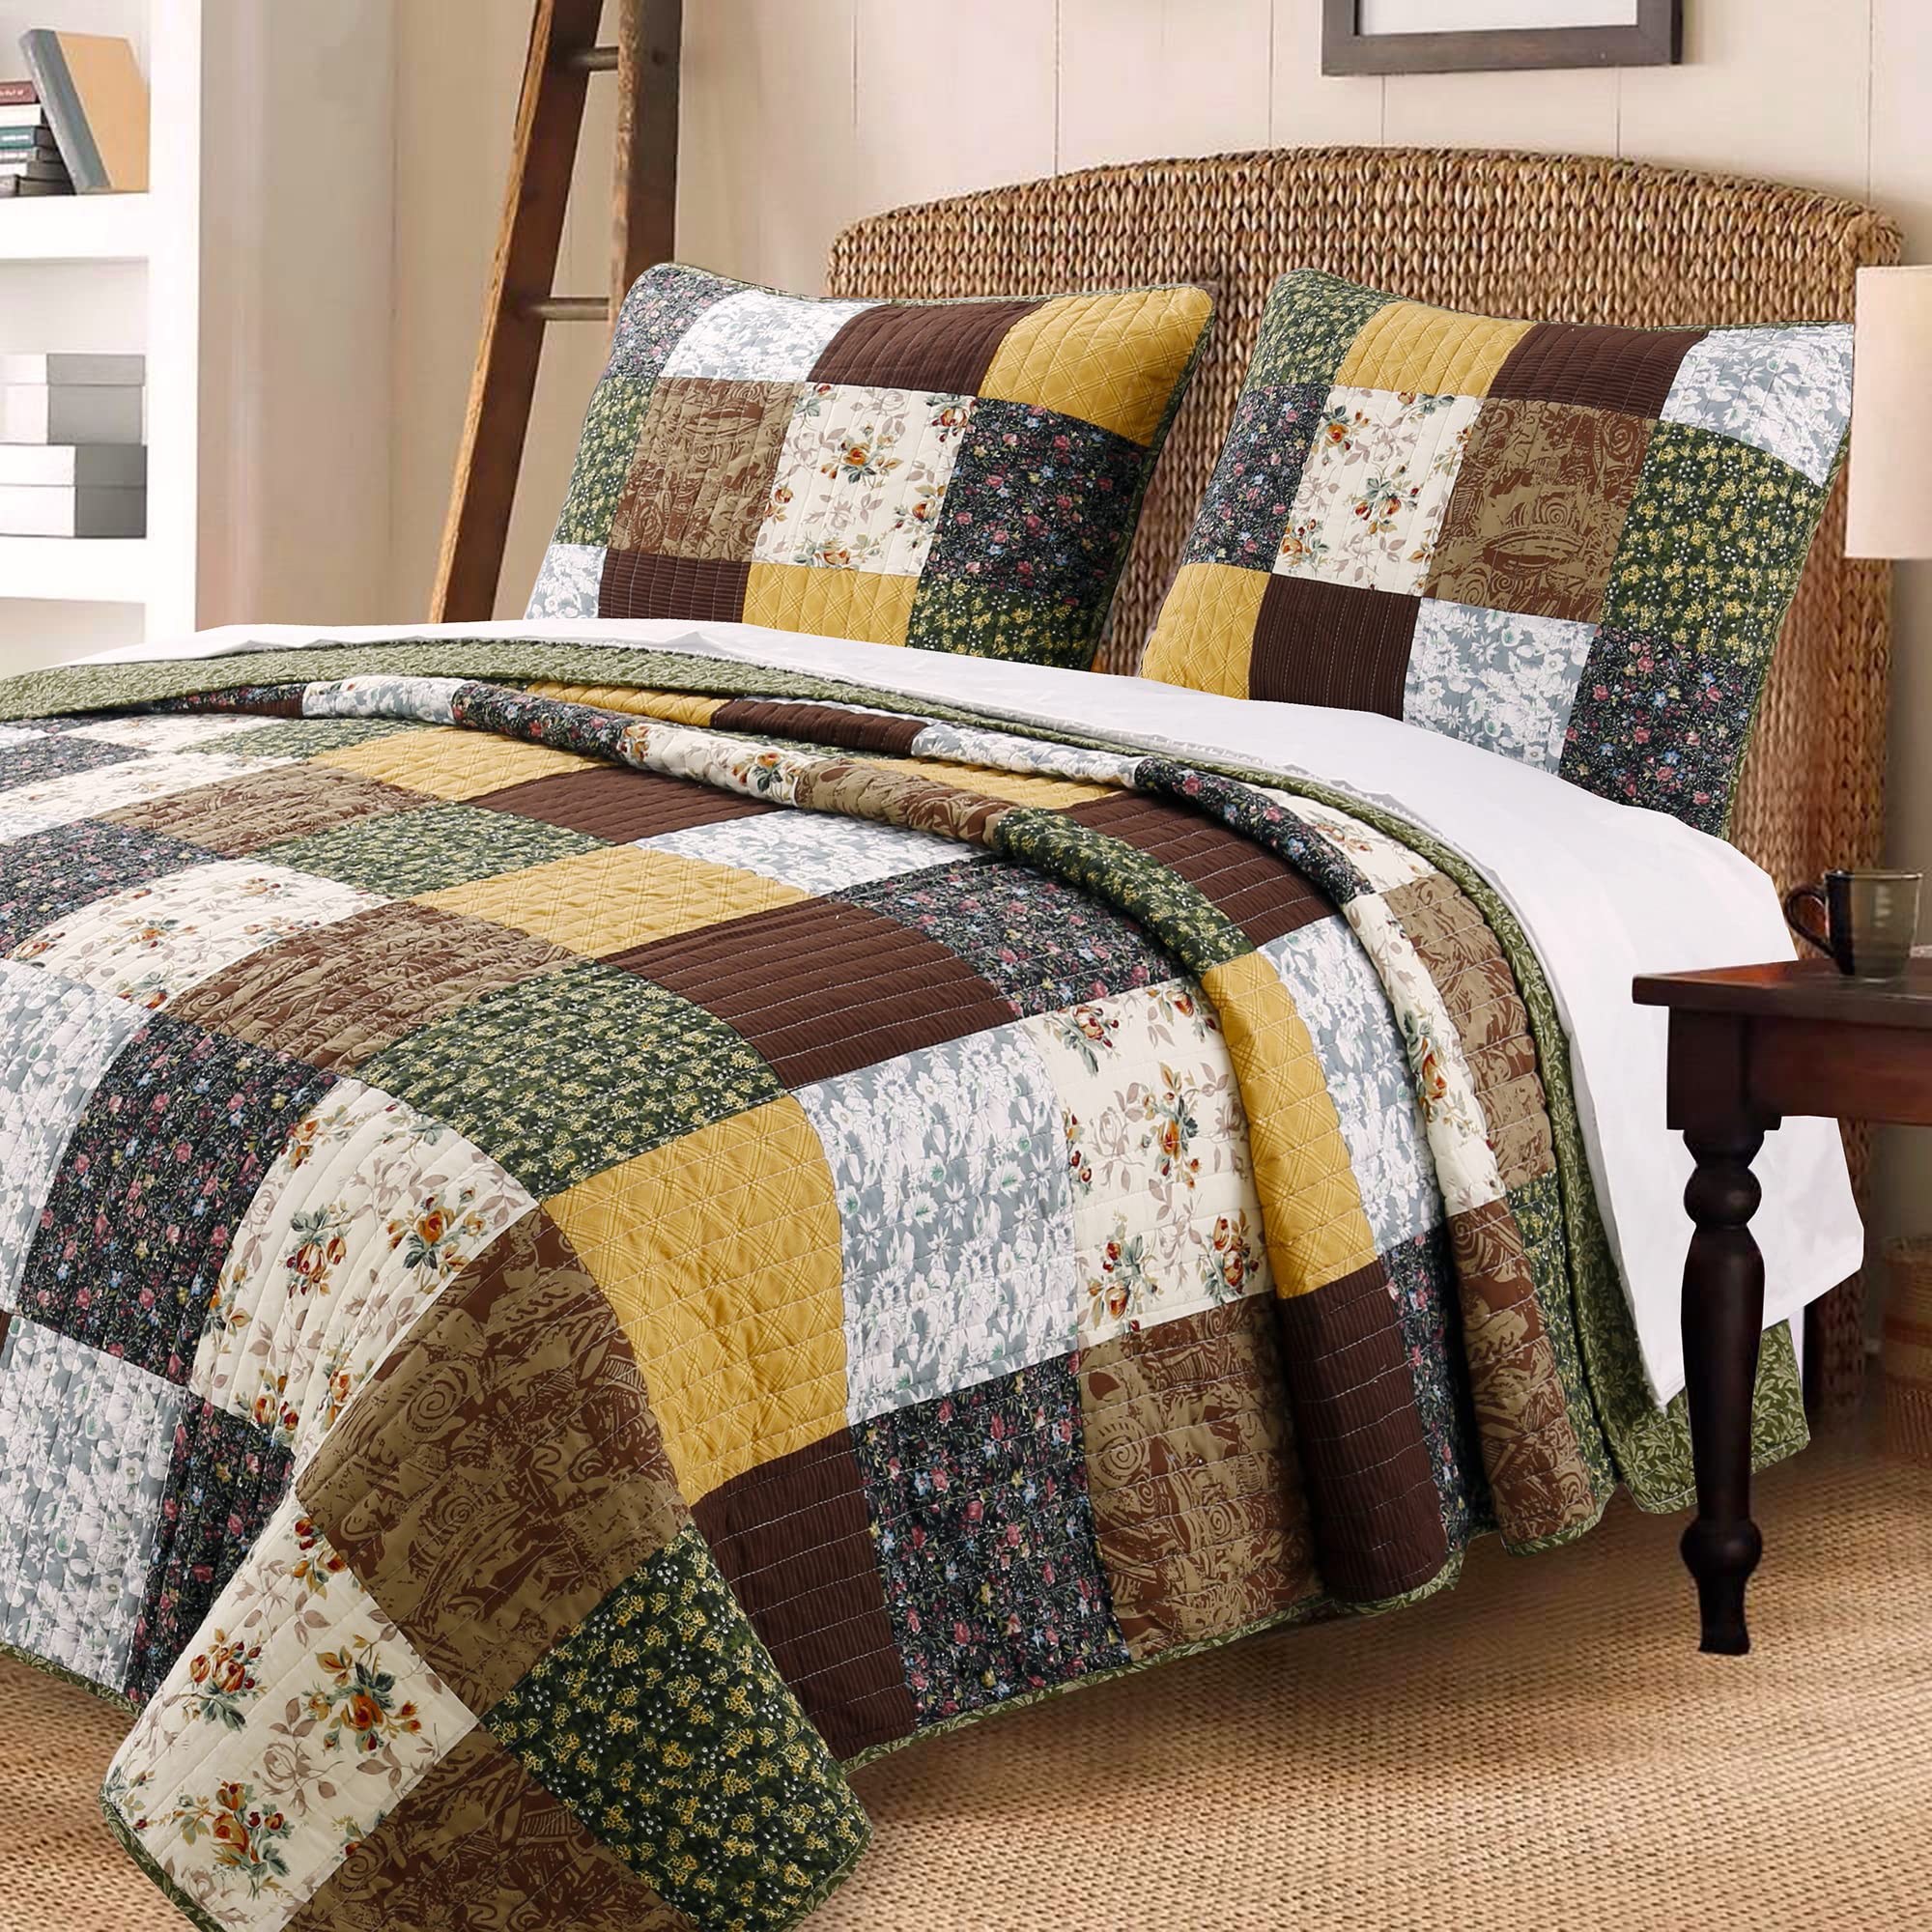 Book Cover Cozy Line Home Fashions Andy Mustard Yellow Country Farmhouse Real Patchwork Quilt Bedding Set, 100% Cotton Reversible Coverlet, Bedspread (Brown Olive, Queen - 3 Piece) Queen - 3 piece Brown / Olive